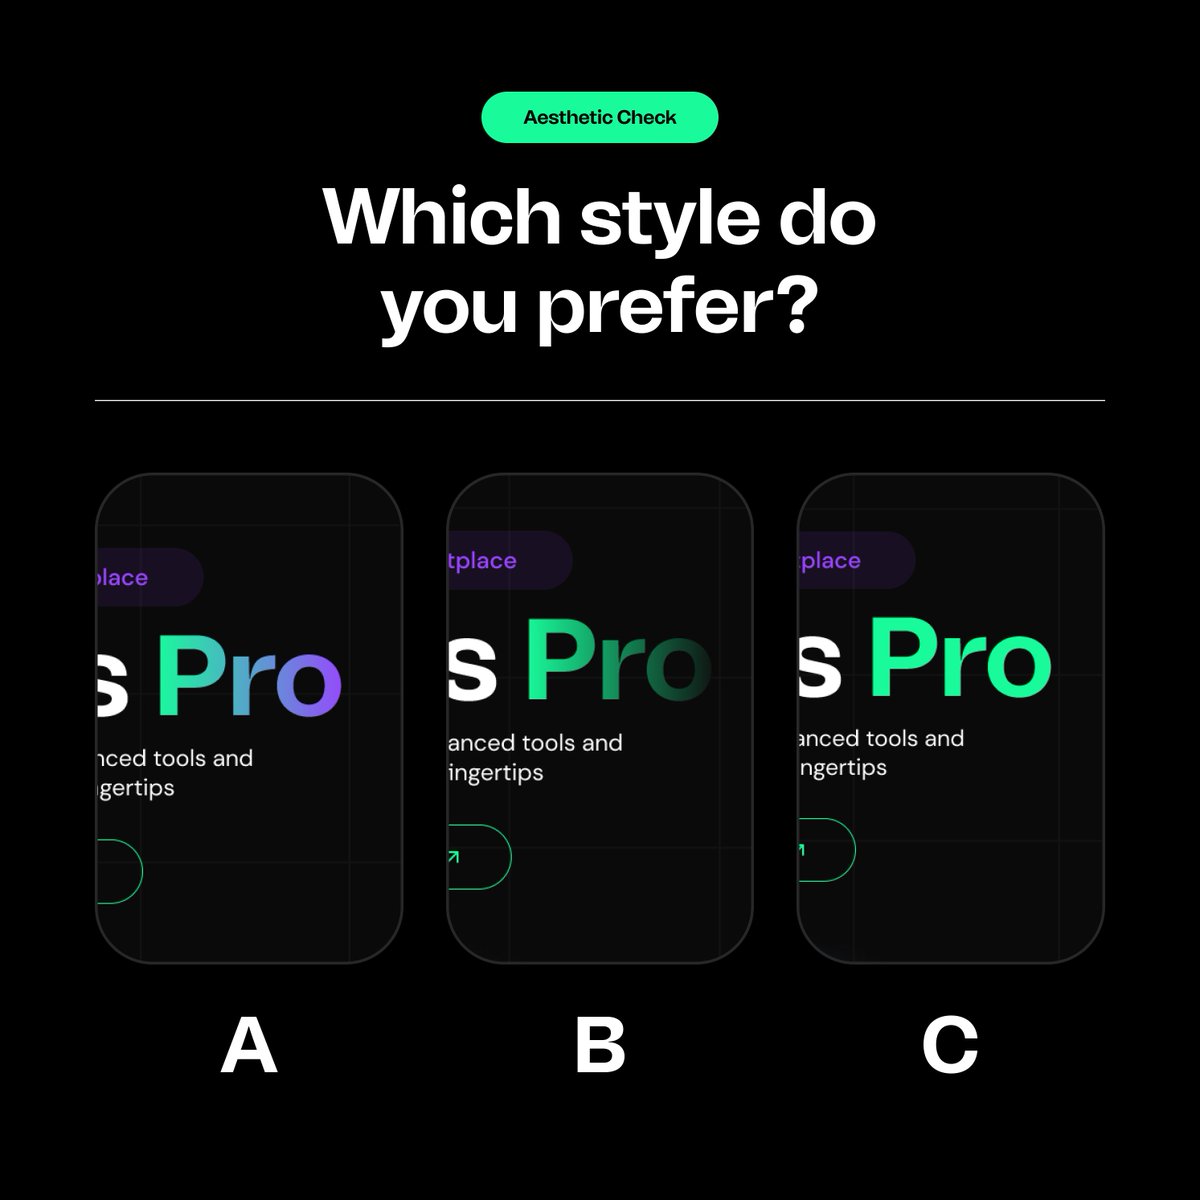 UX Designers, I'm doing an aesthetic check on which gives a more pro feel. Which is it gonna be?